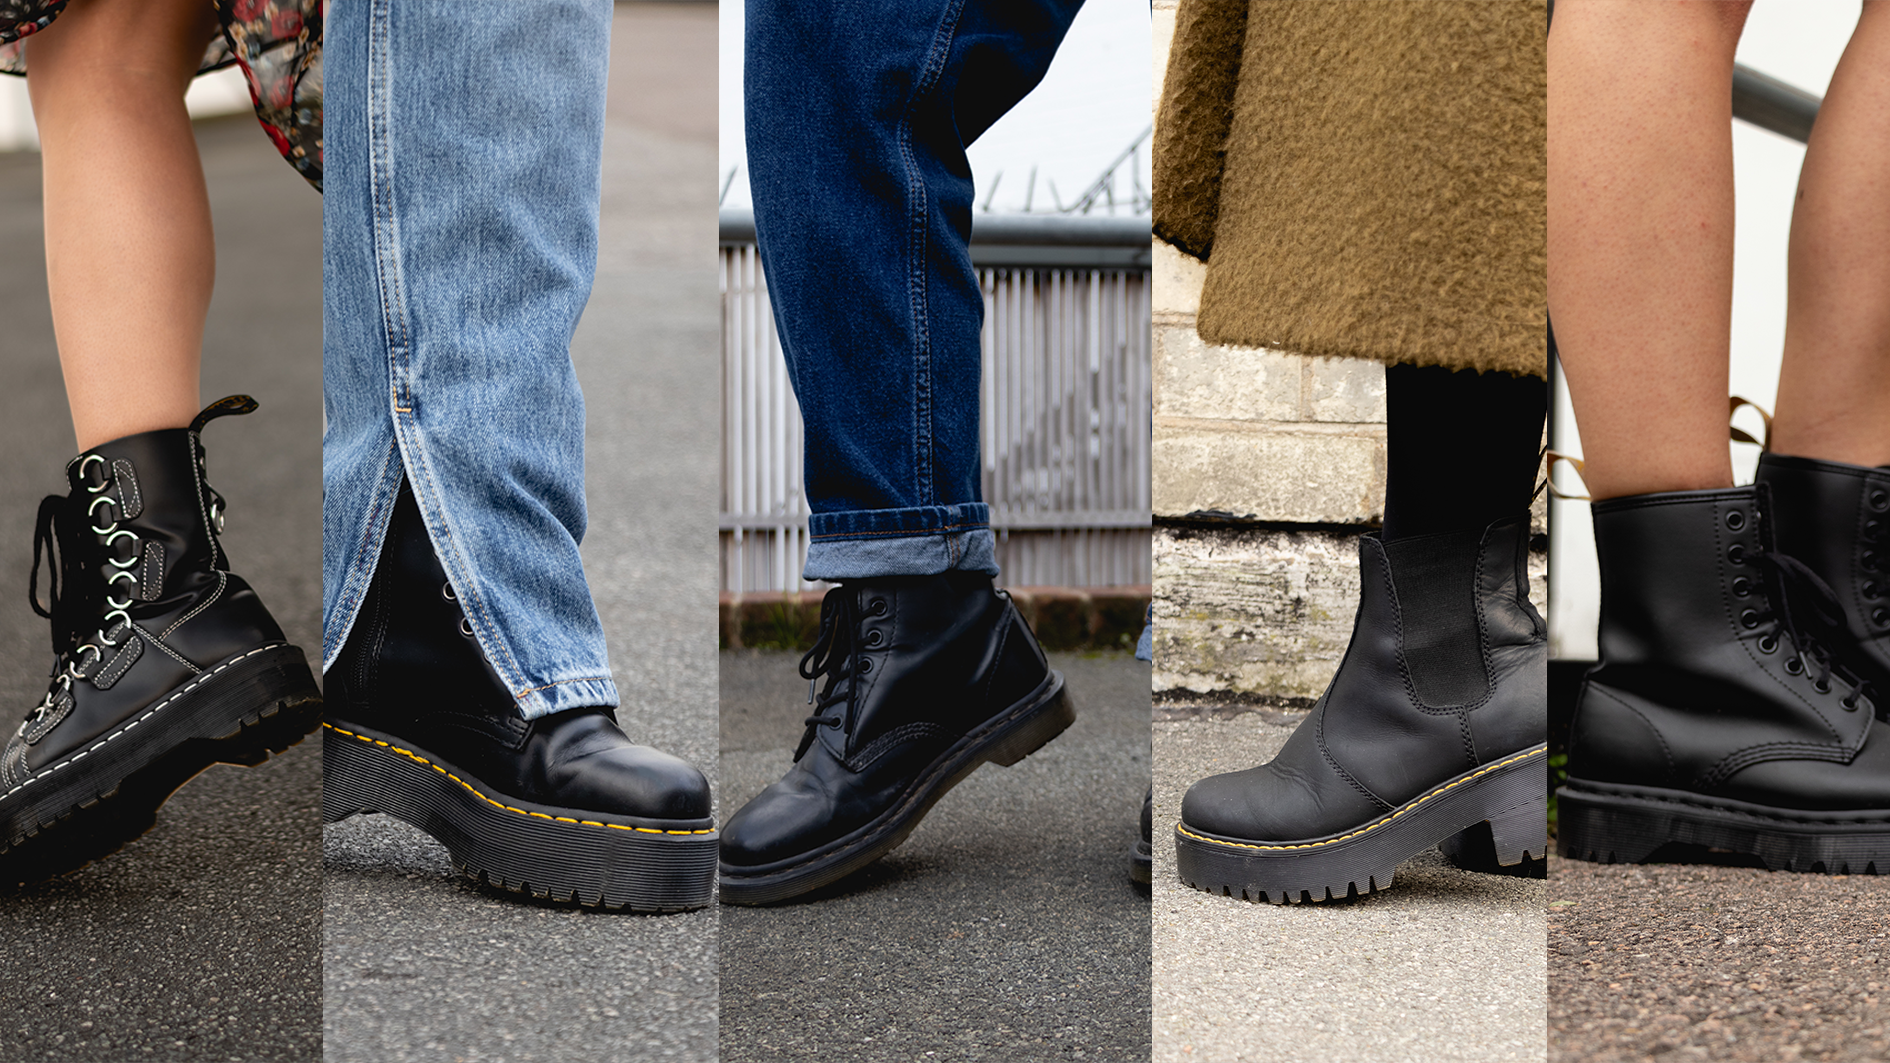 16 Dr. Martens Outfits to Wear for Winter